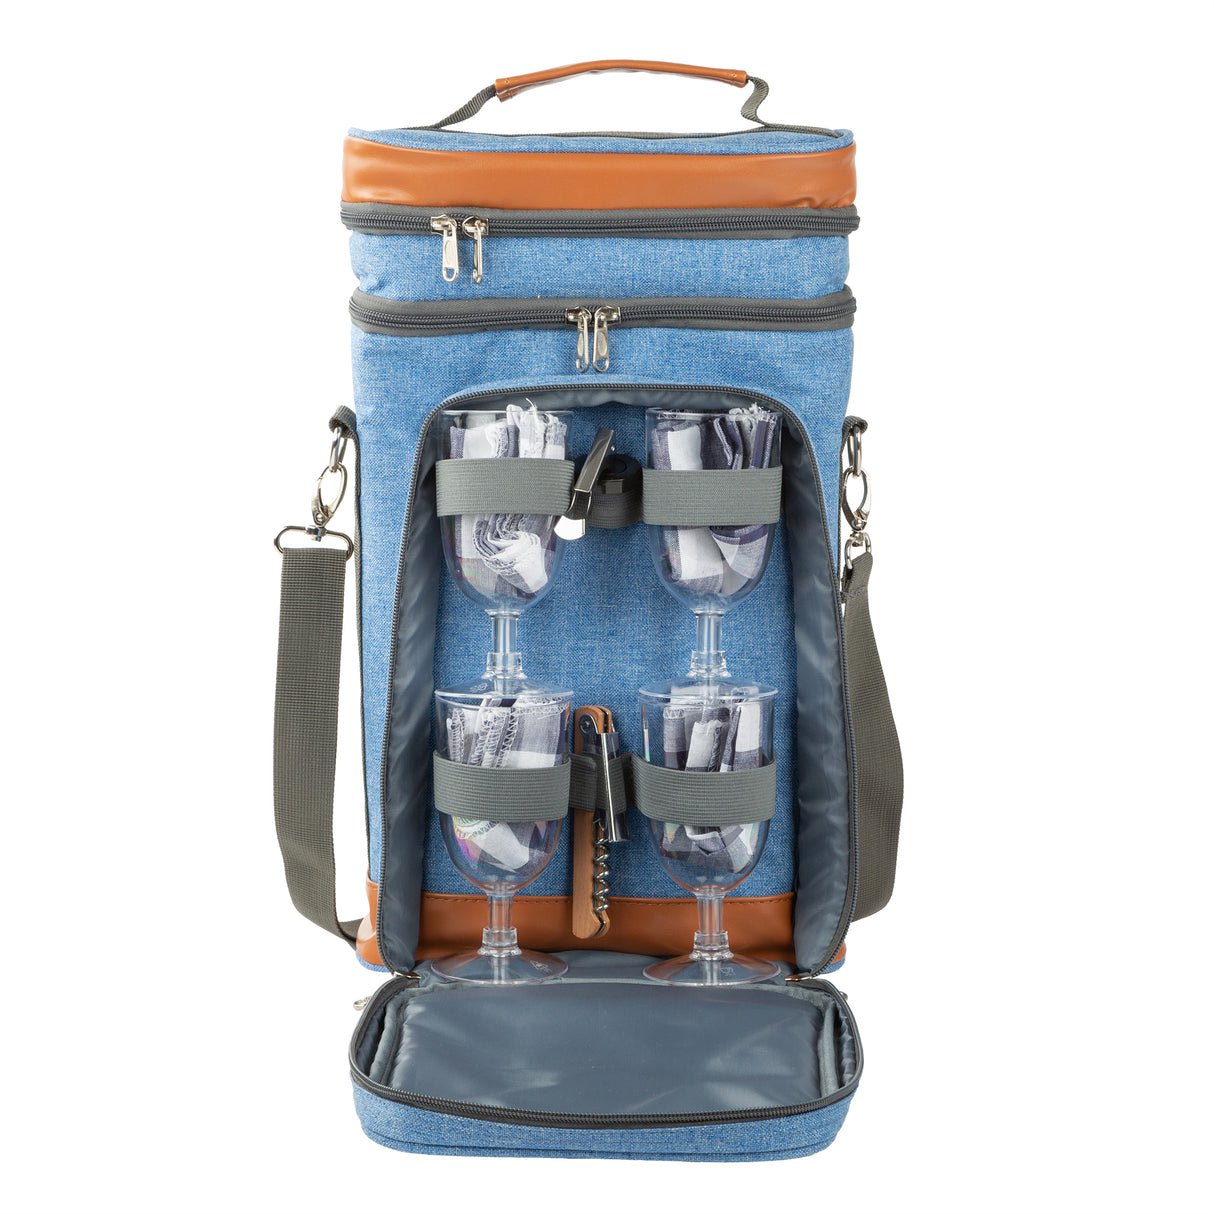 Blue Contemporary Wine Cooler Bag for 4 people with accessories - Greenfield Collection